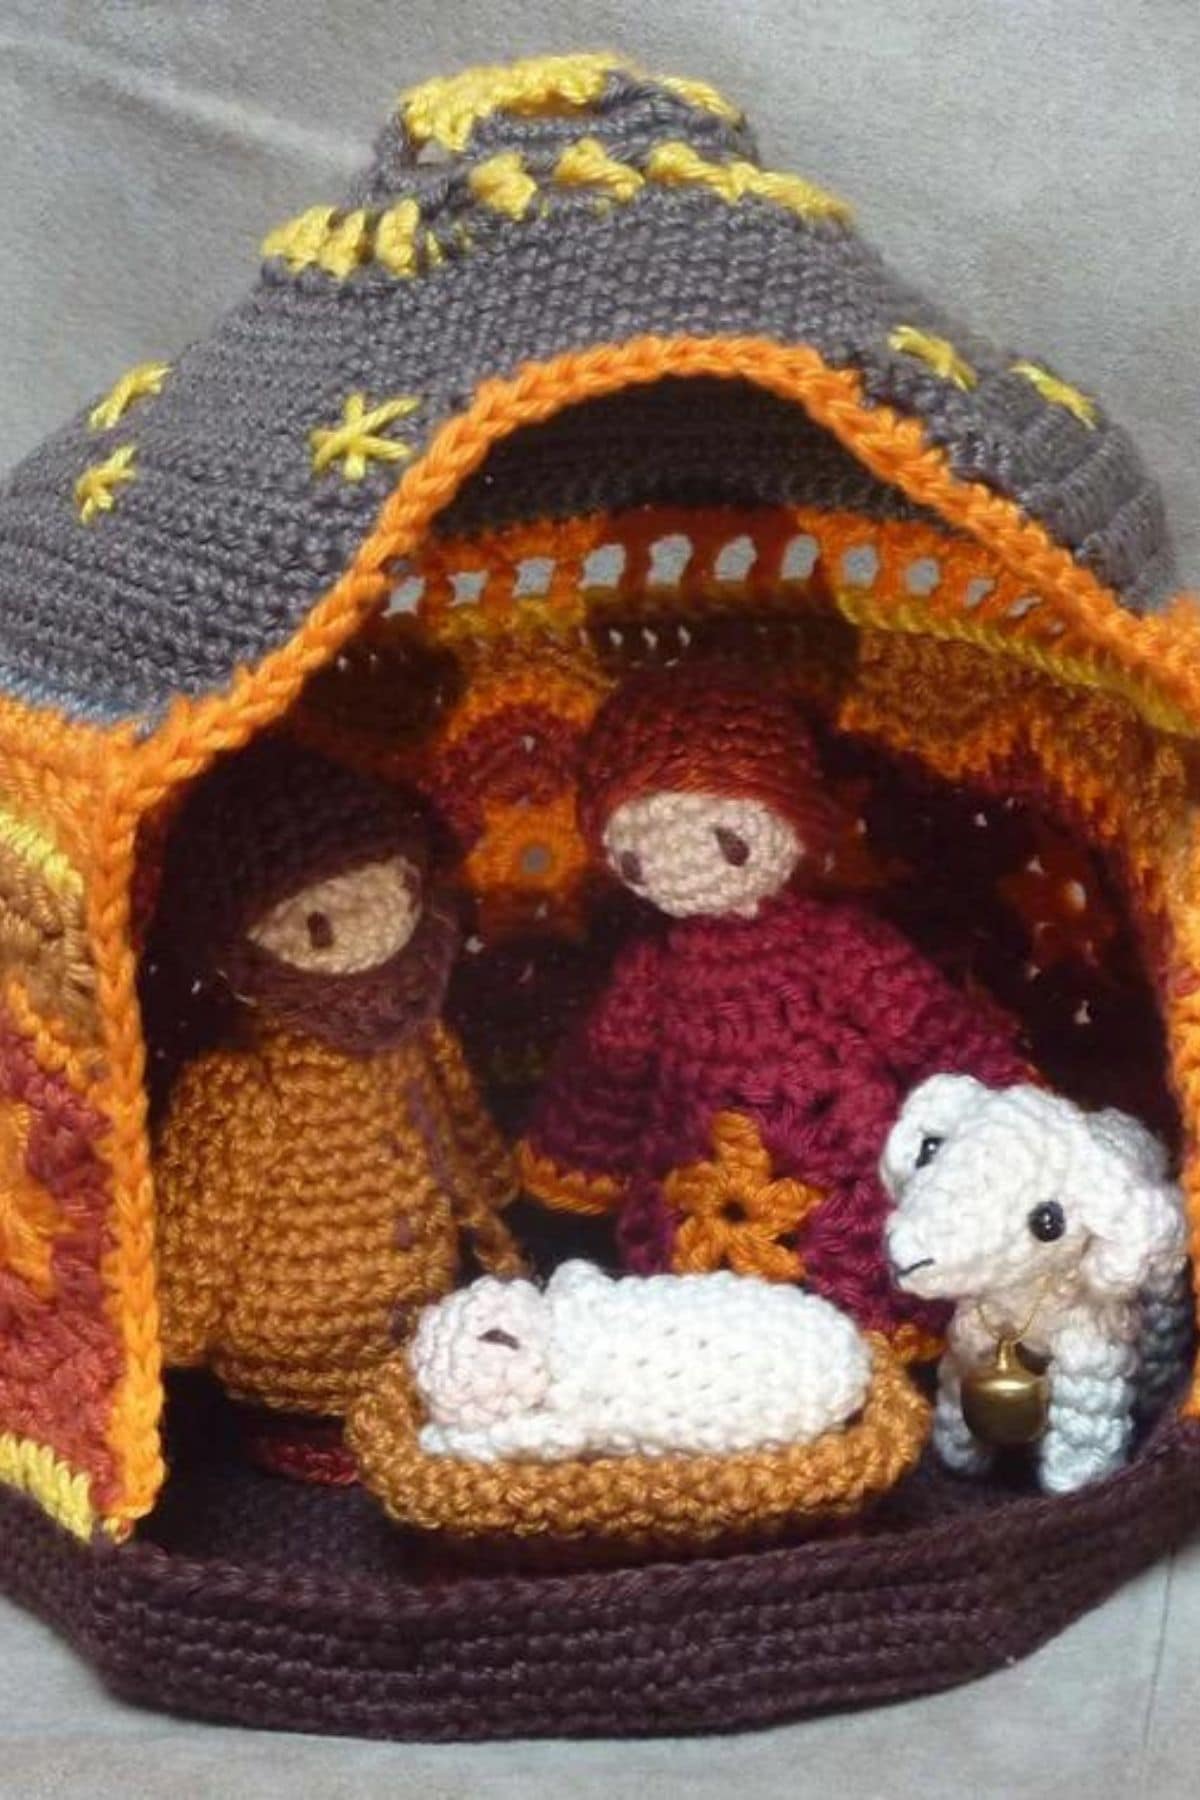 An orange and gray crochet structure covered in yellow stars with a small nativity scene using Mary, Joseph, and Jesus inside it.